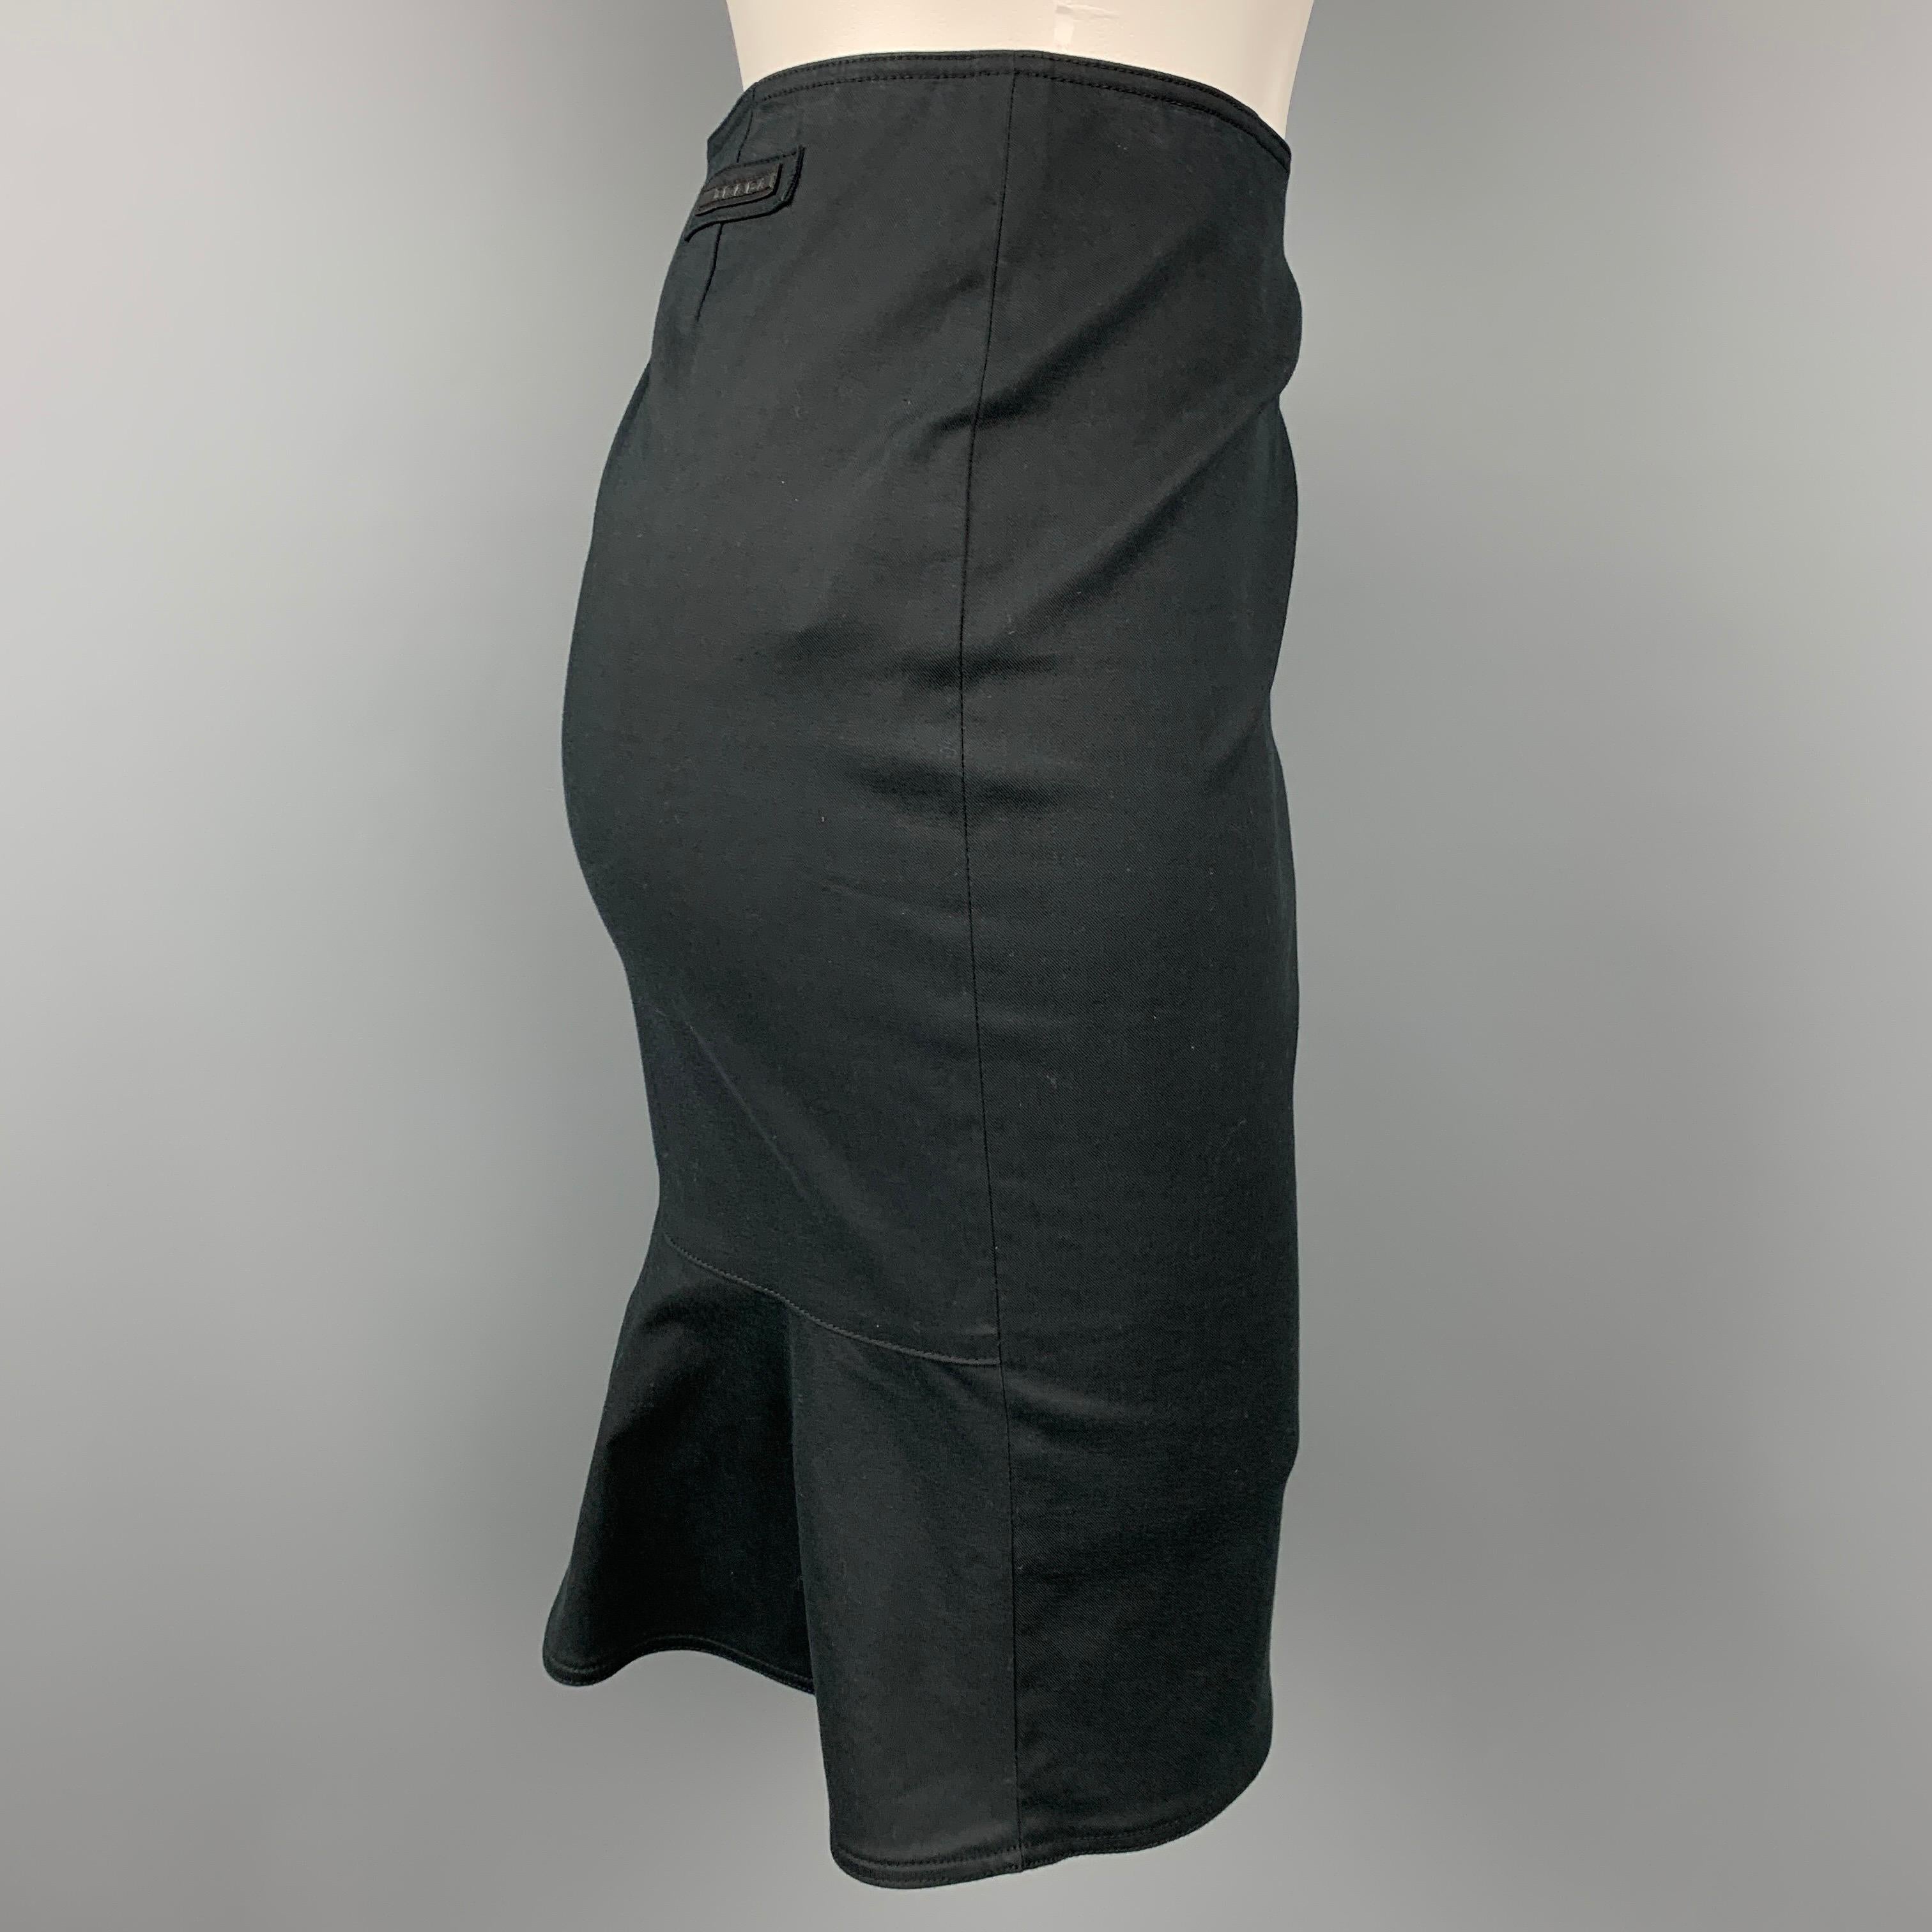 PRADA skirt comes in a black cotton featuring a flounce style, logo detail, and a front zipper closure. 

Very Good Pre-Owned Condition.
Marked: 38

Measurements:

Waist: 28 in.
Hip: 34 in.
Length: 19.5 in. 